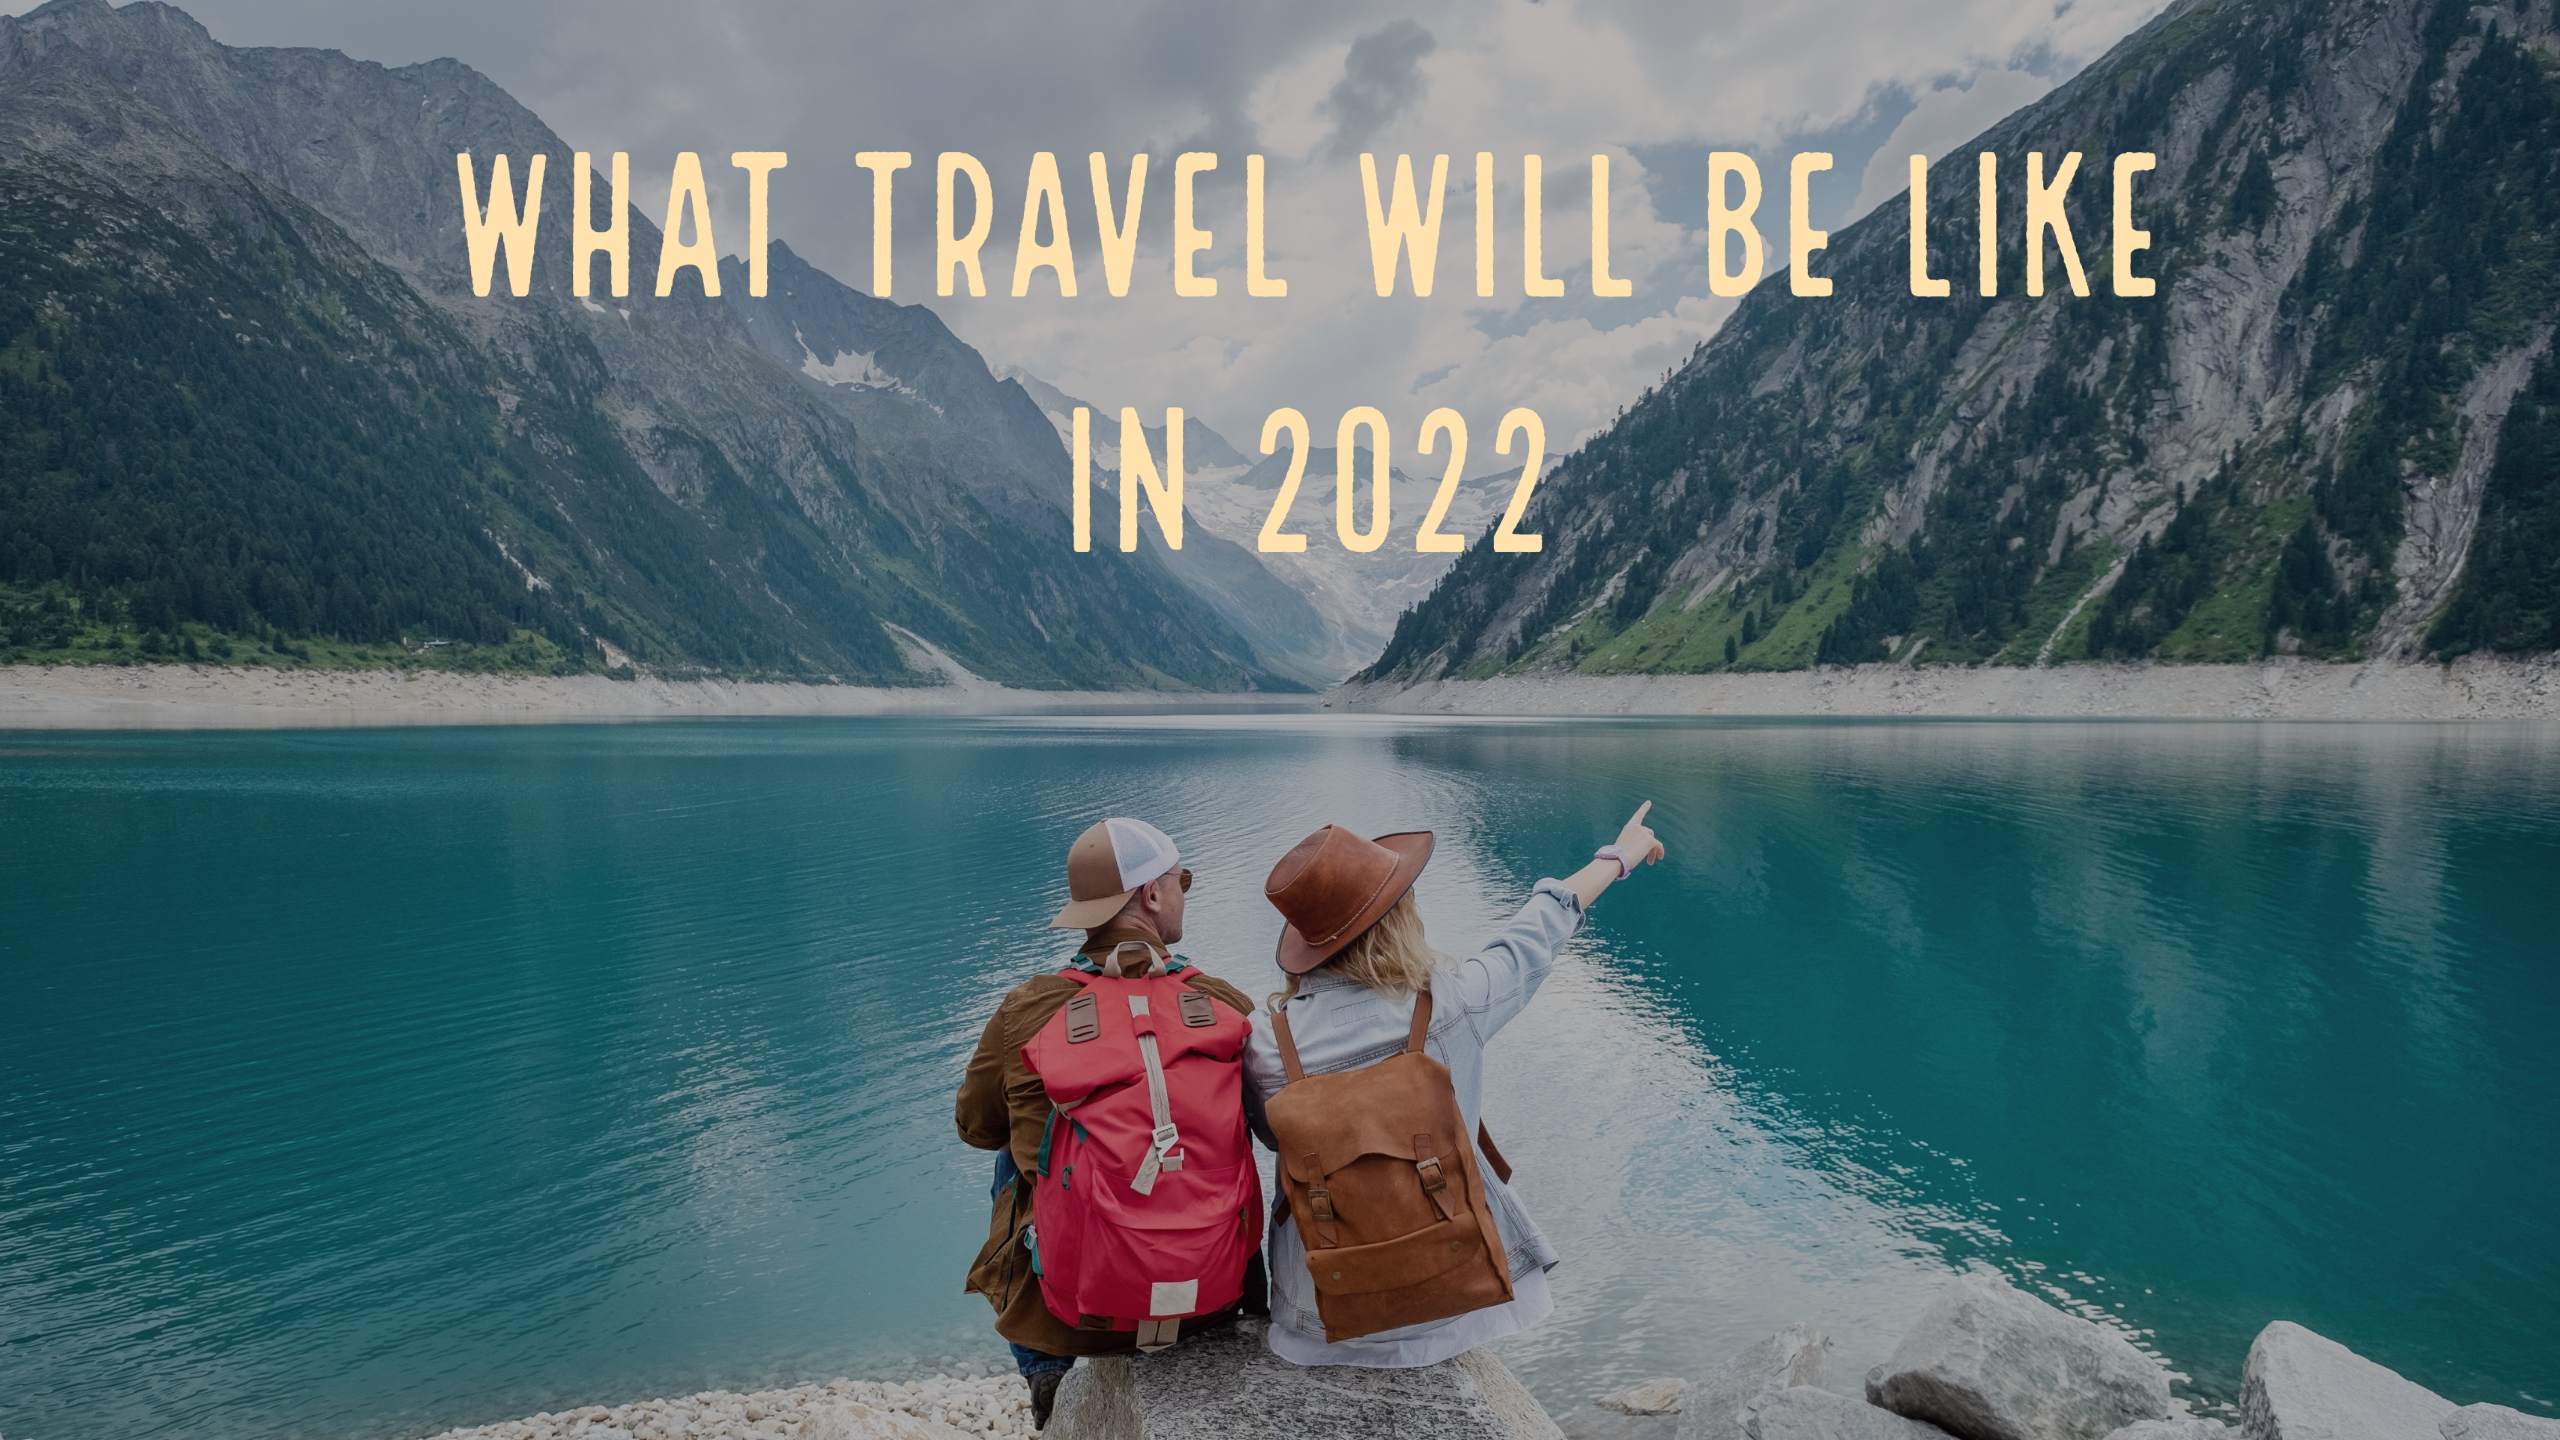 What Travel Will Be Like in 2022